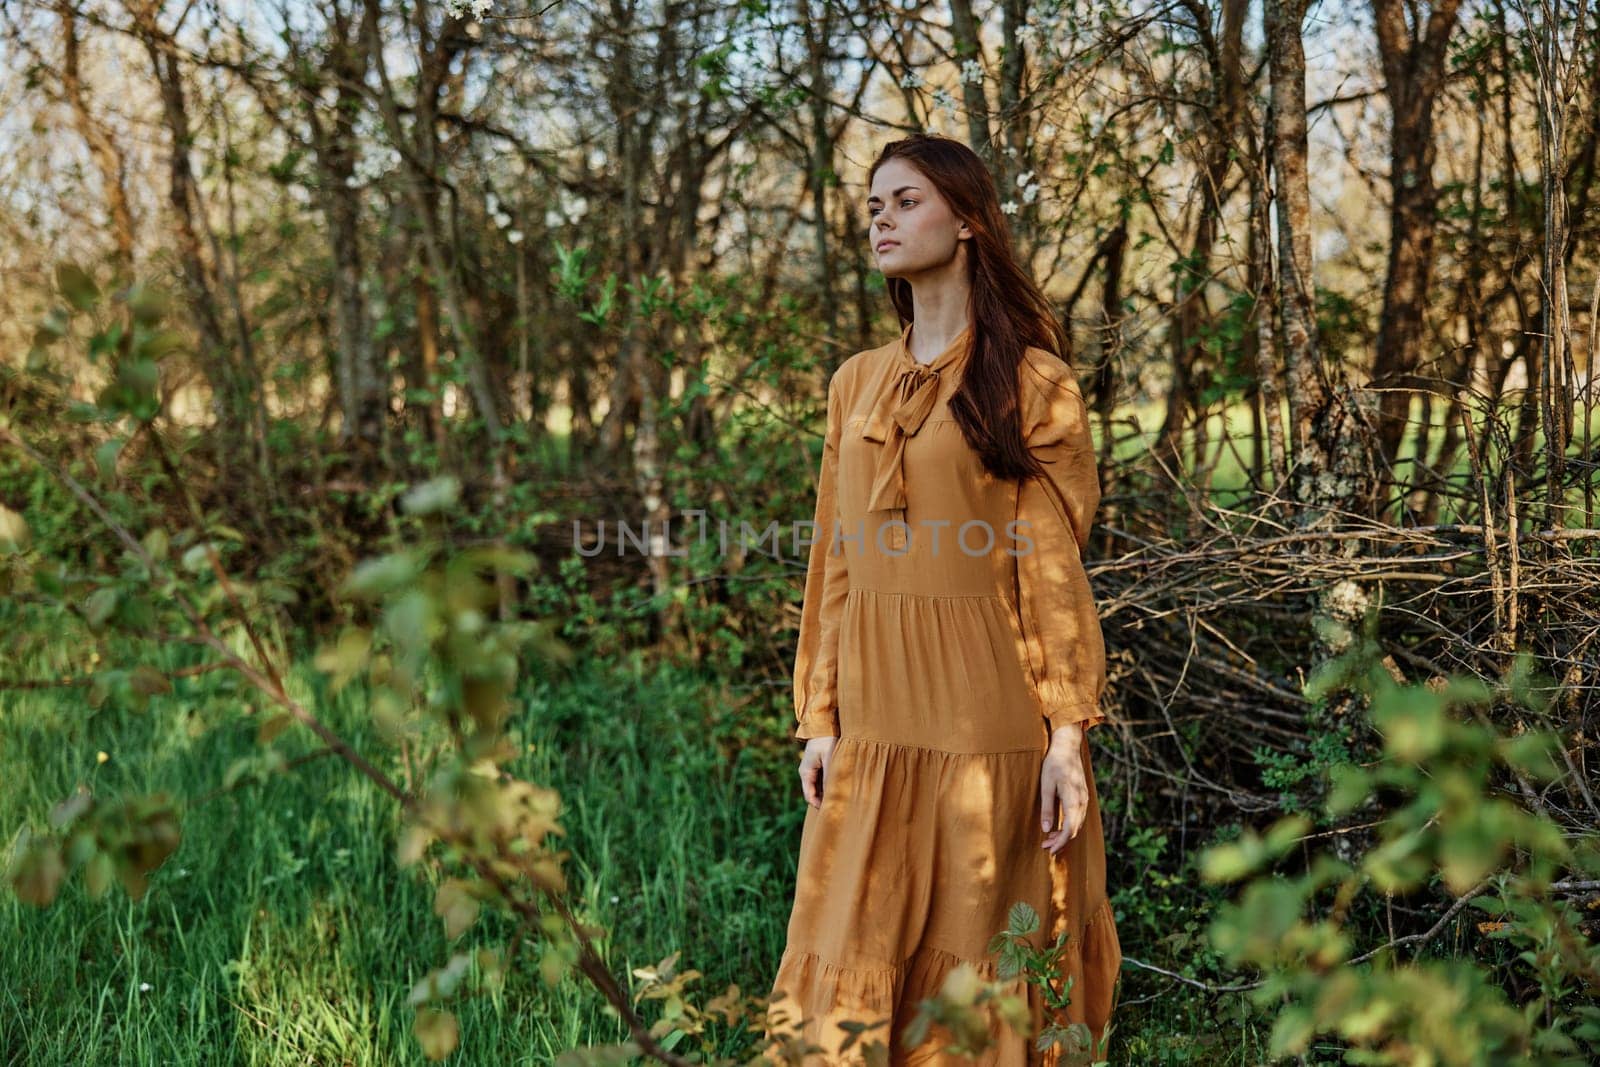 a woman with long hair walks in the shade near the trees, dressed in a long orange dress, enjoying the weather and the weekend, inspecting the trees. The theme of privacy with nature by Vichizh